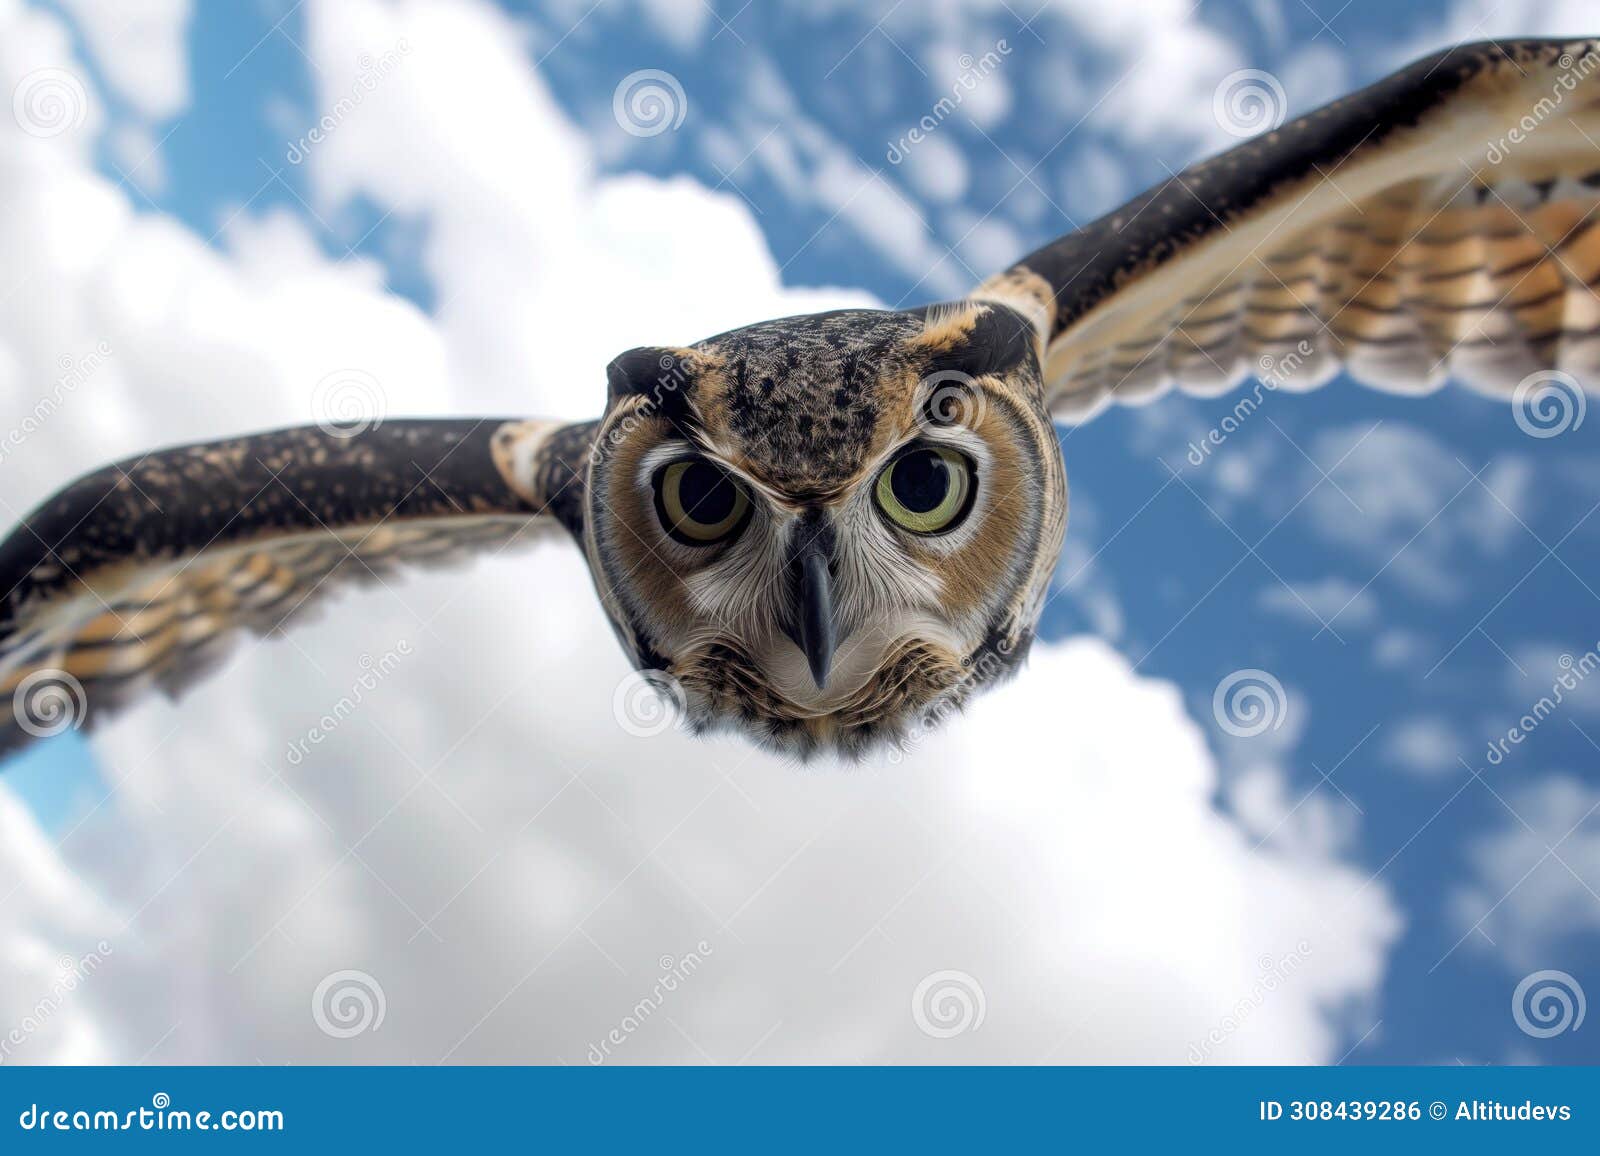 closeup of owl midflight, eyes focused on camera, white clouds backdrop